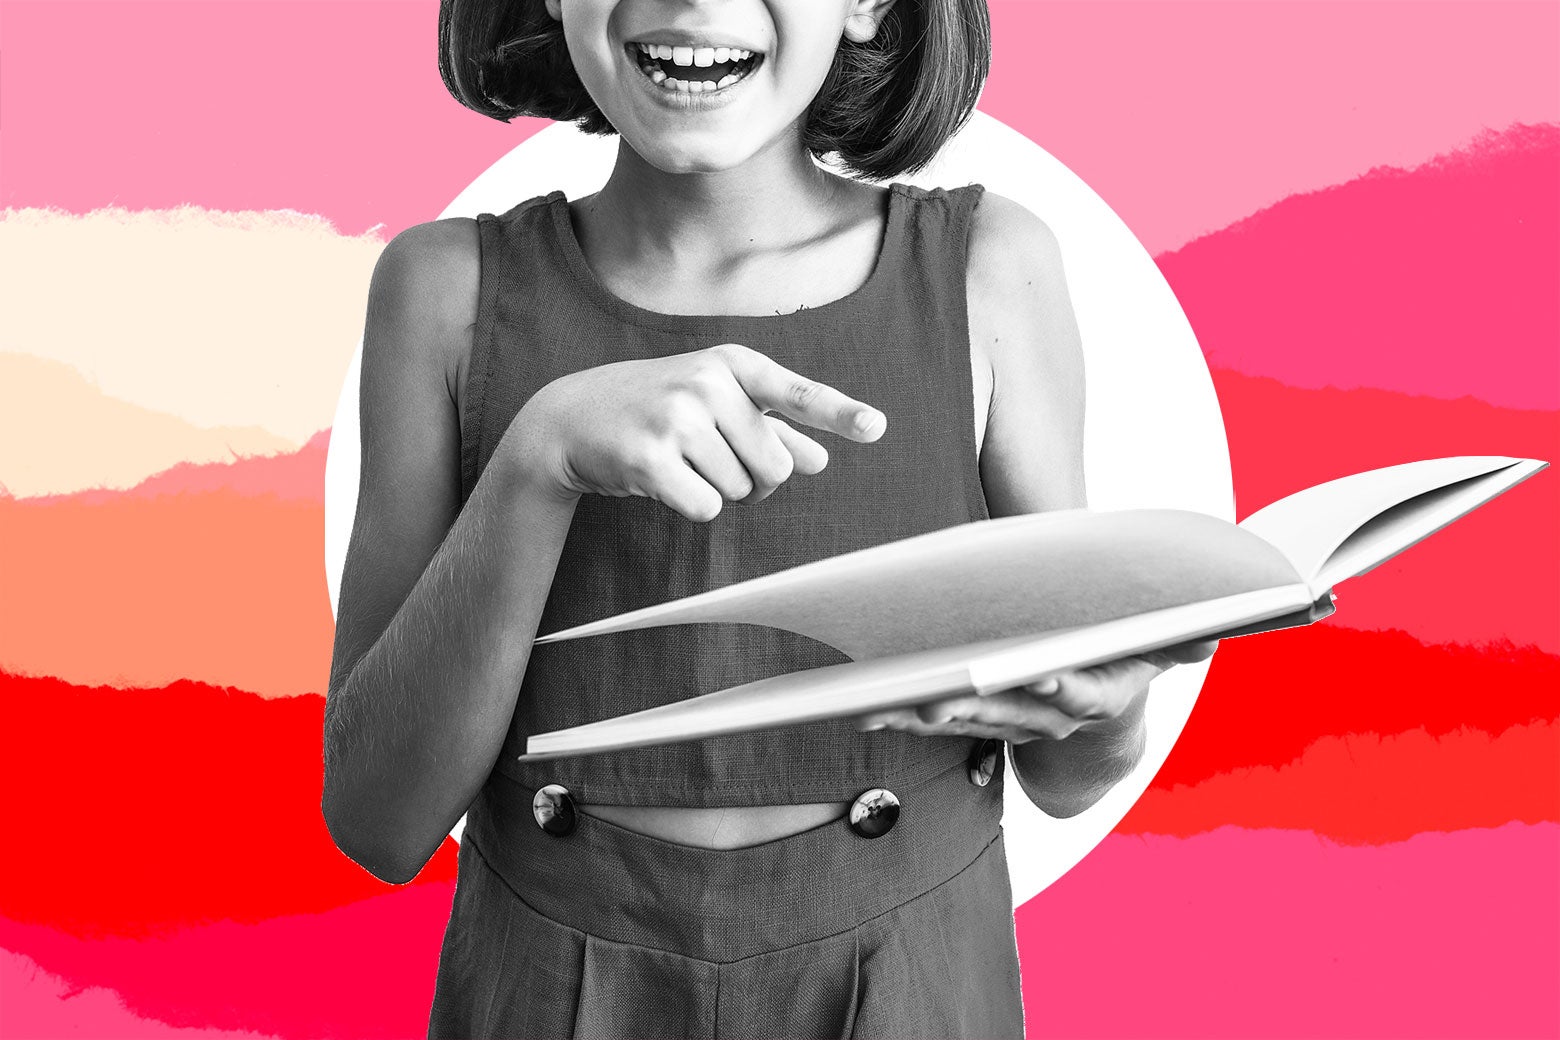 Young girl holding a book, pointing and laughing.